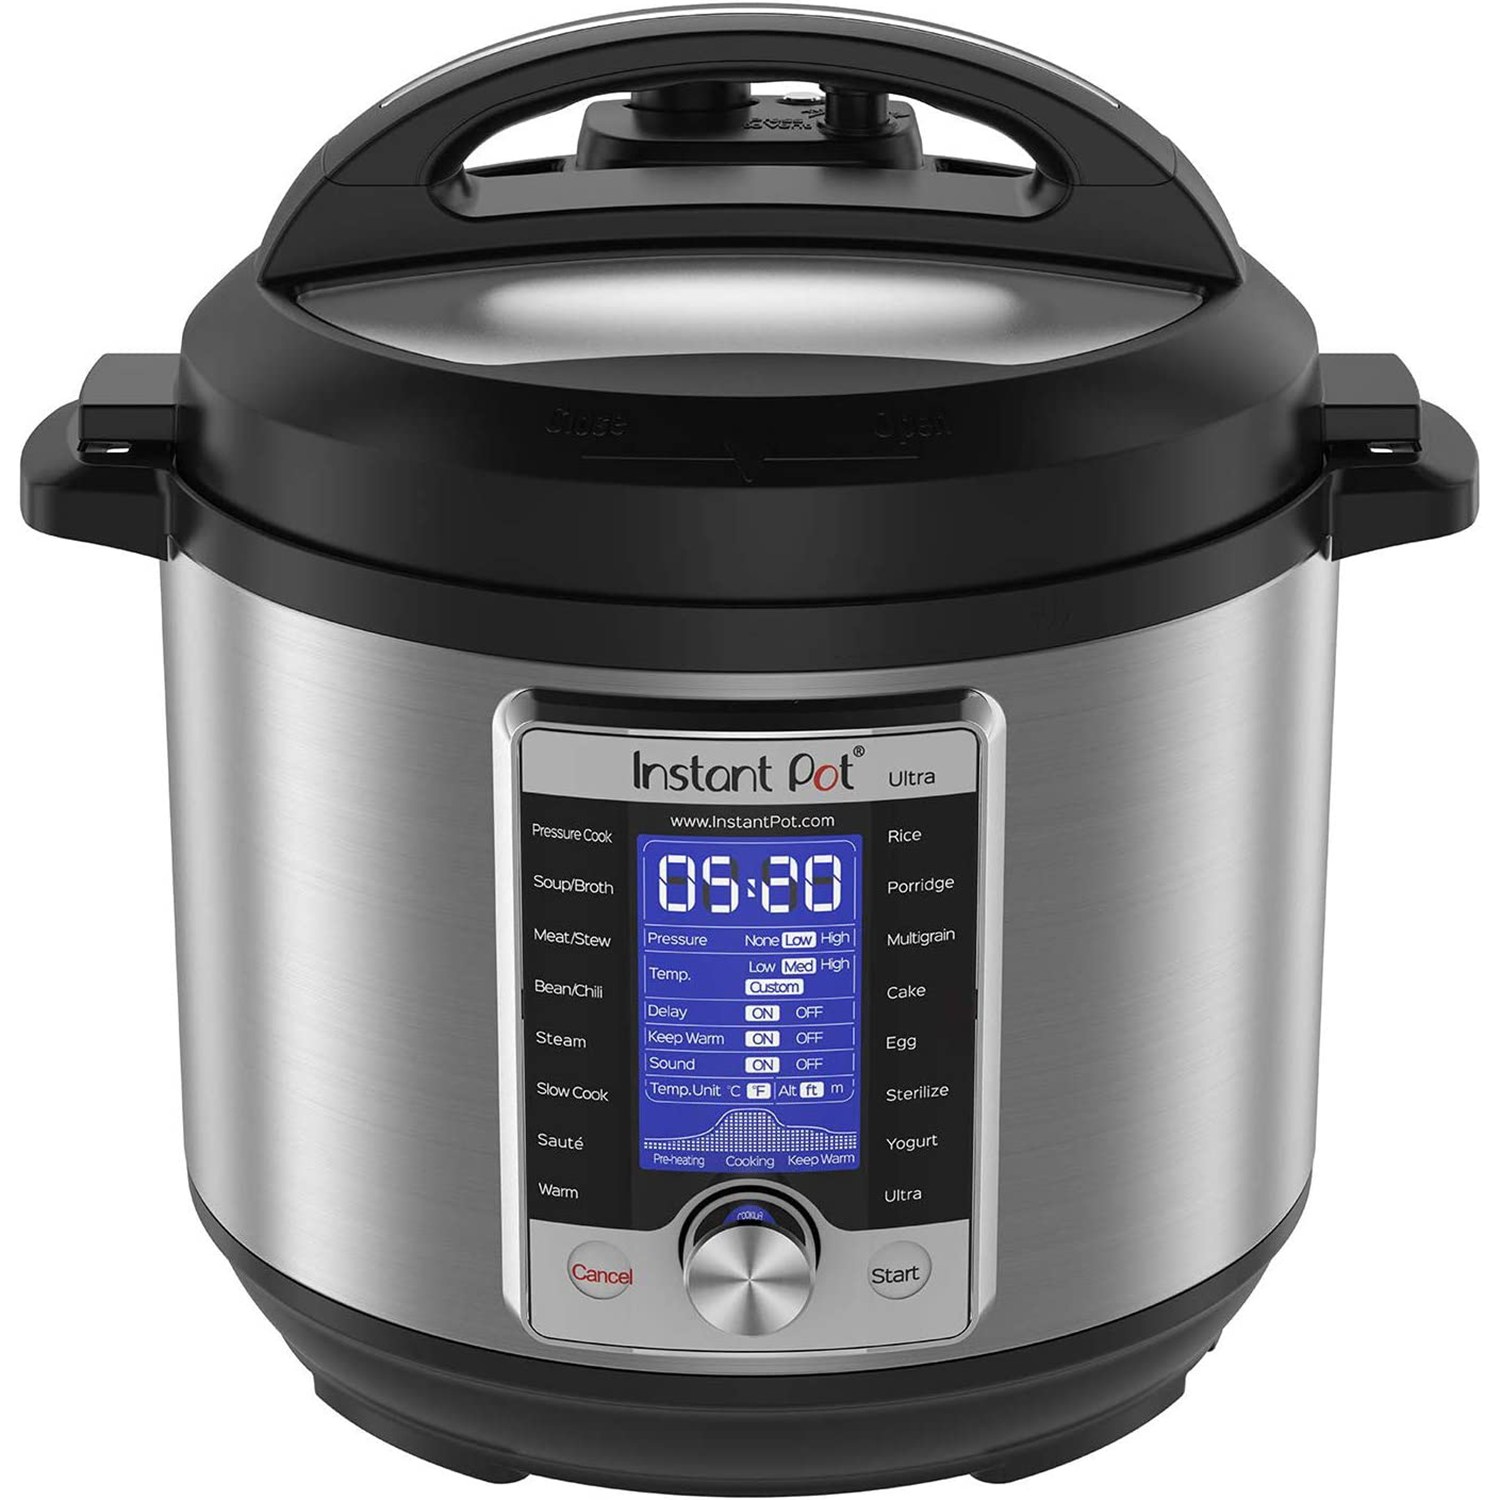 https://cdn.bestreviews.com/images/product-images/instant-pot-ultra-10-in-1.jpg